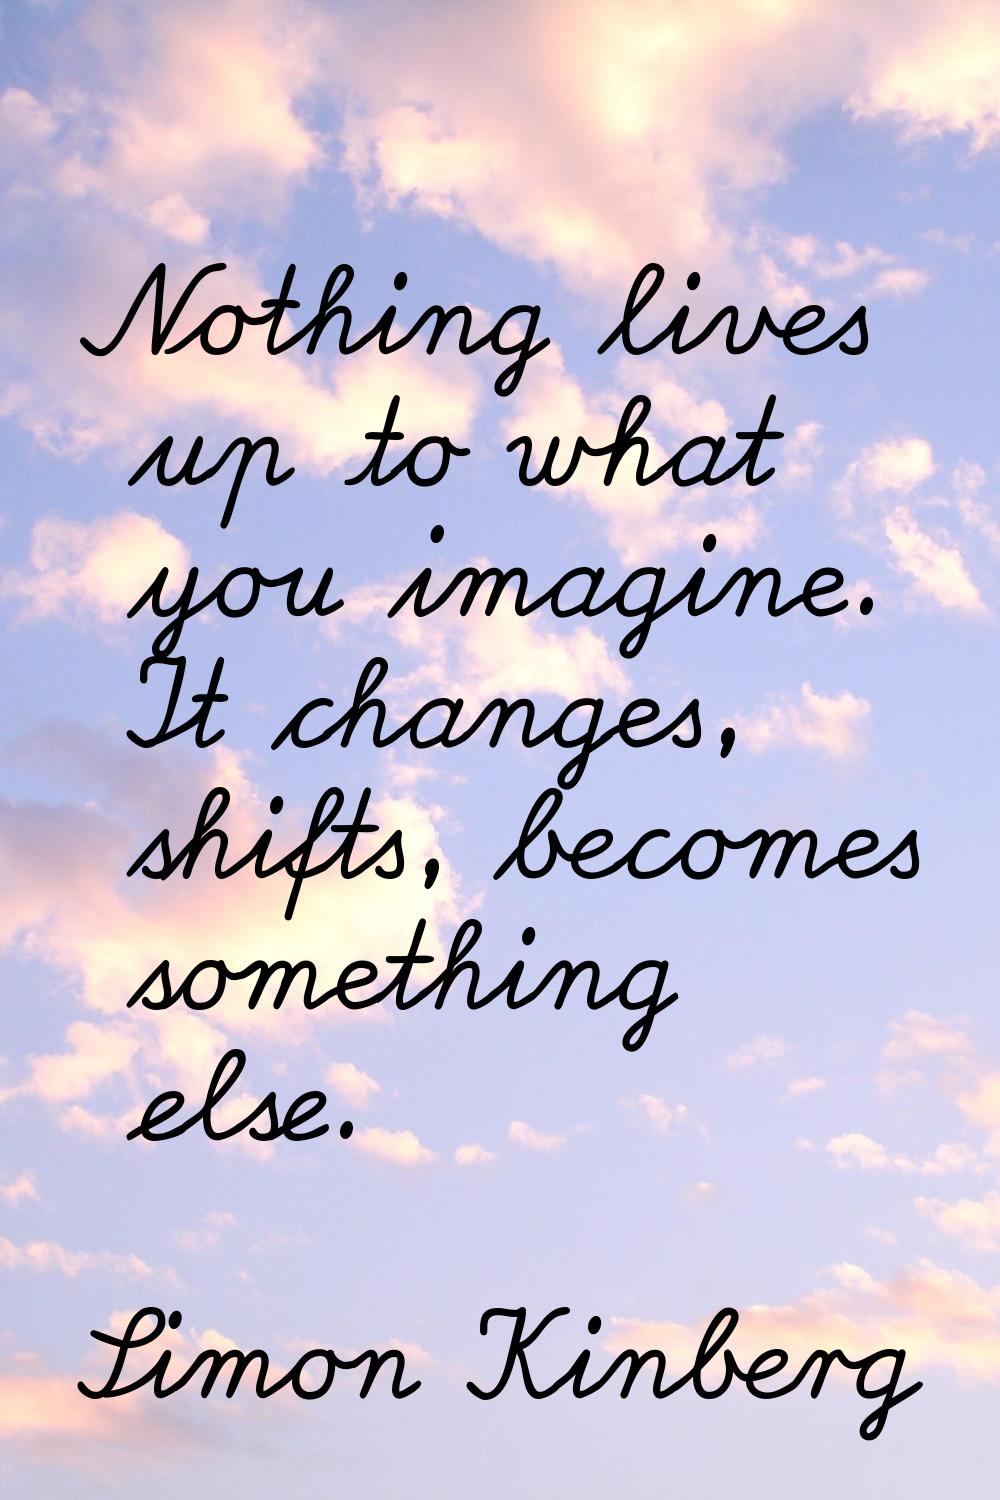 Nothing lives up to what you imagine. It changes, shifts, becomes something else.